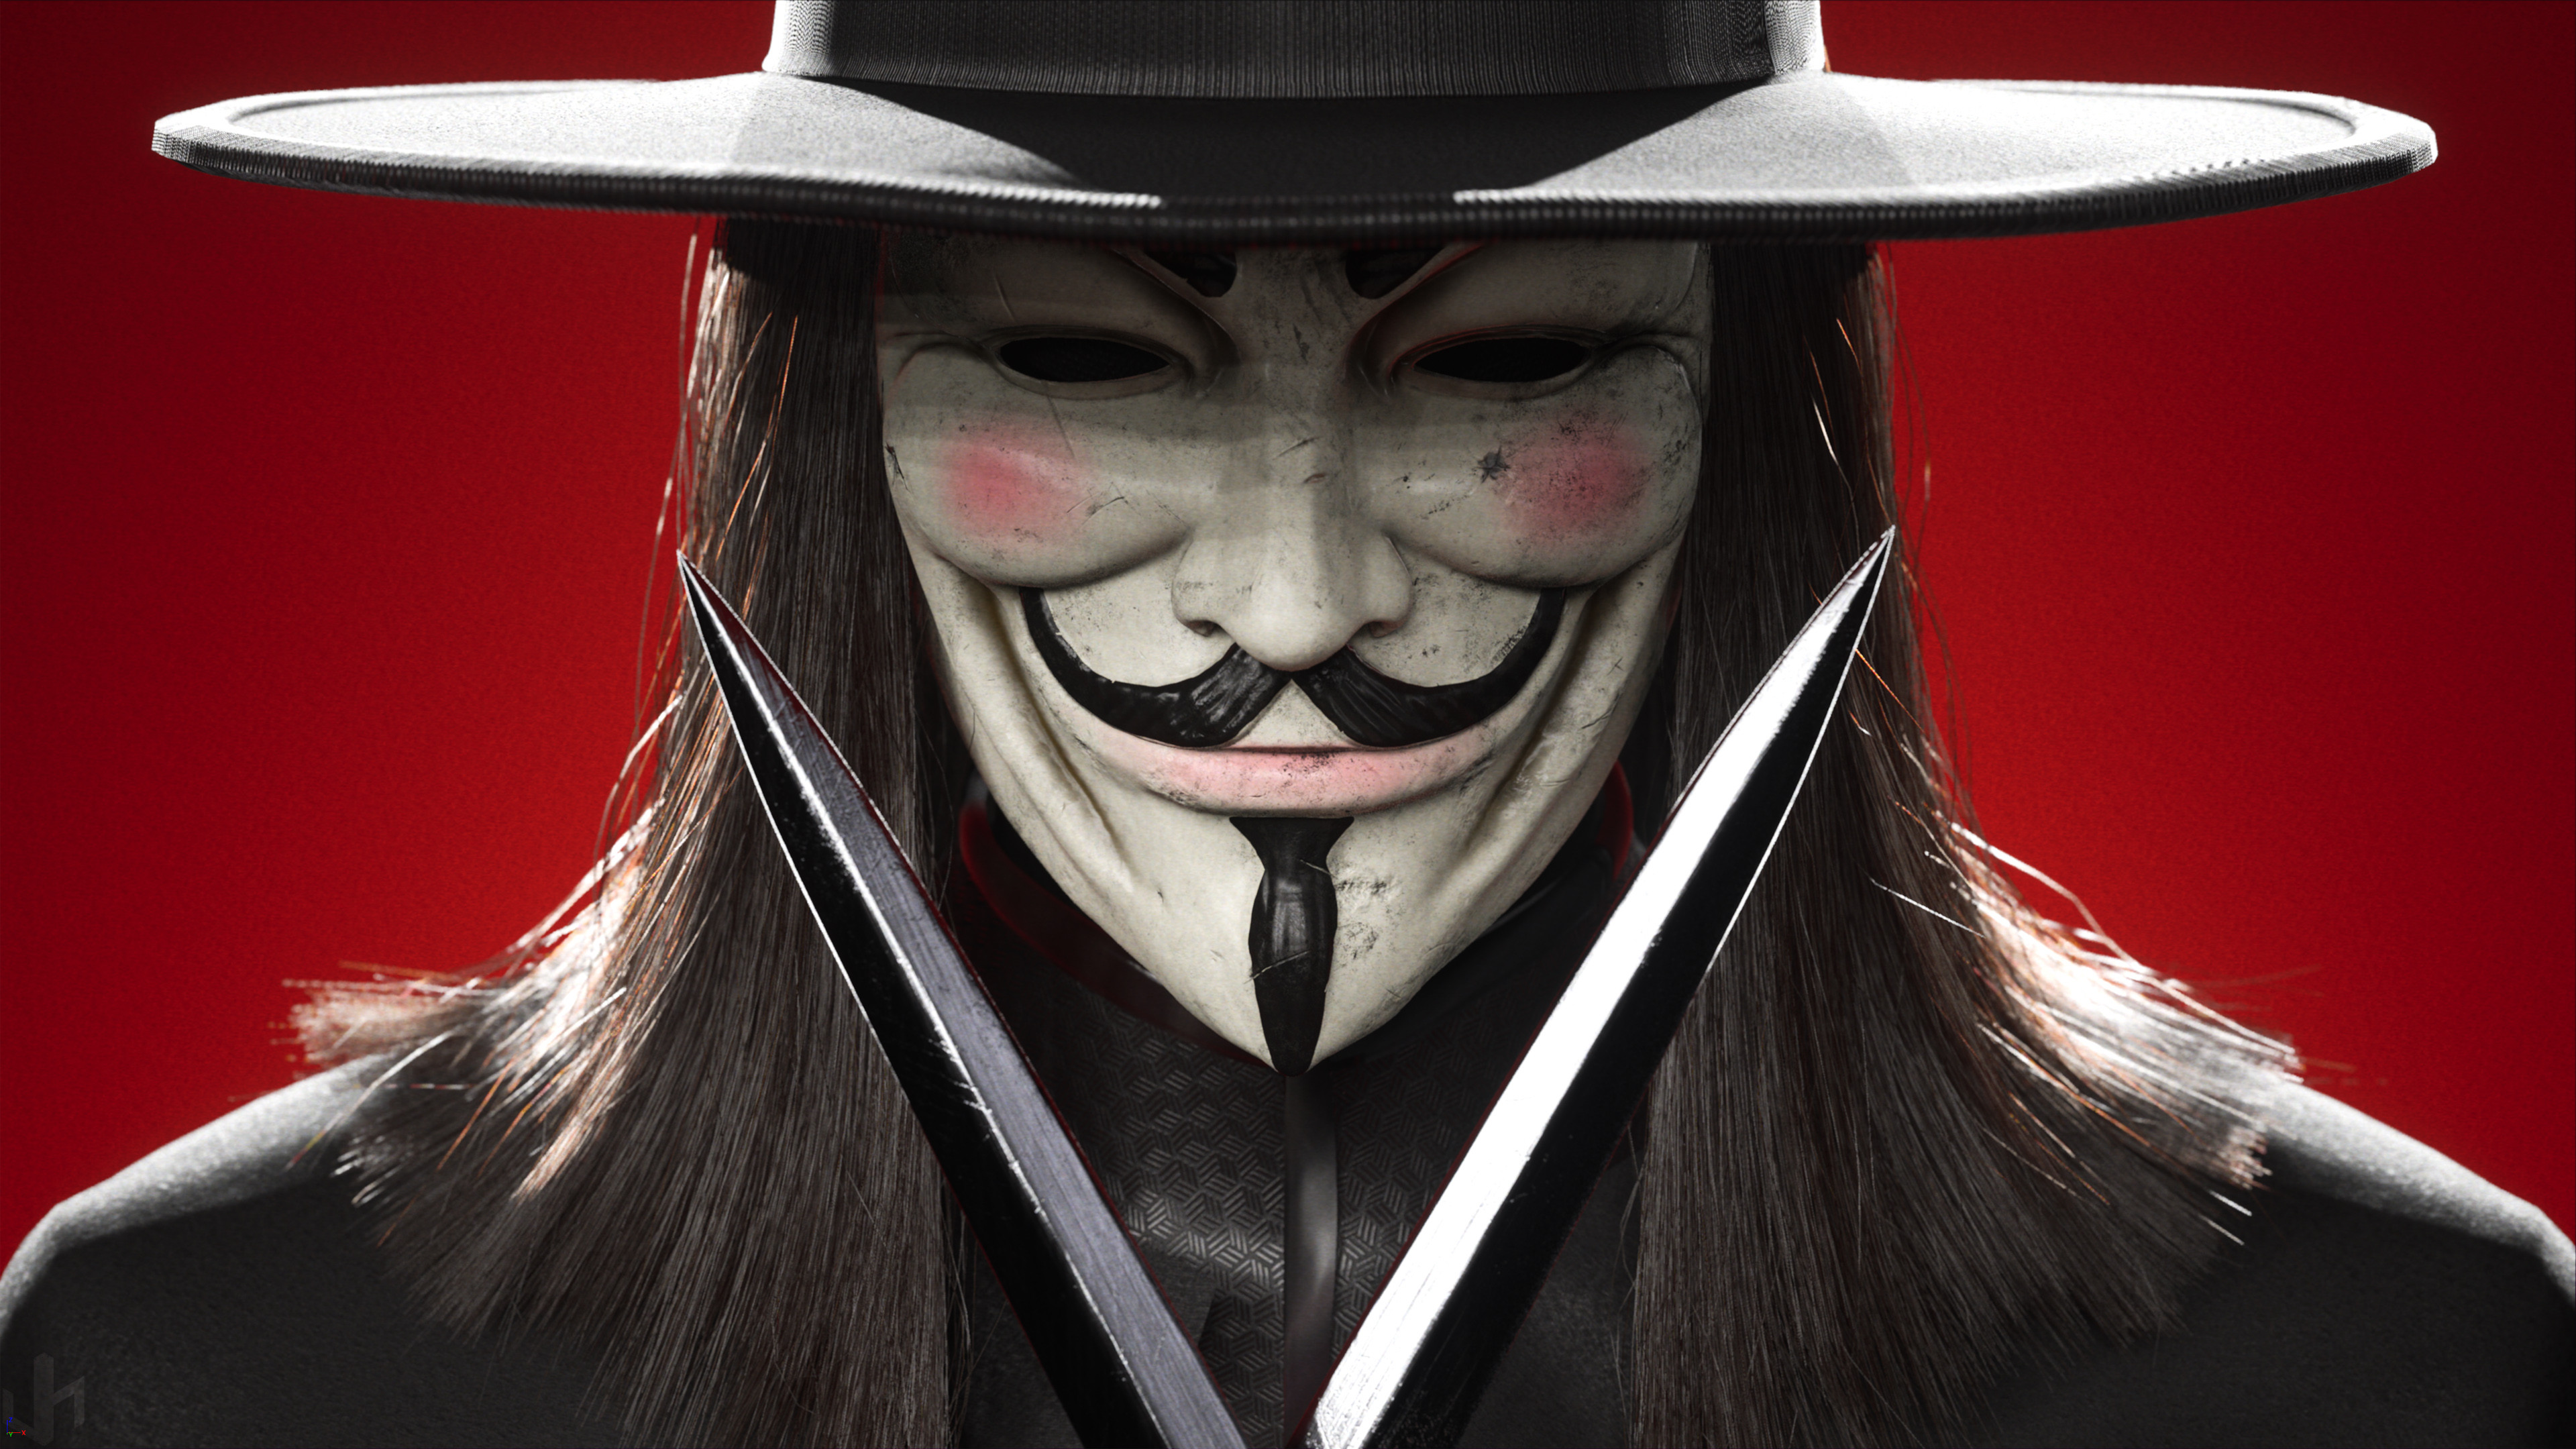 People 3840x2160 V for Vendetta red background CGI mask knife movies Guy Fawkes Guy Fawkes mask